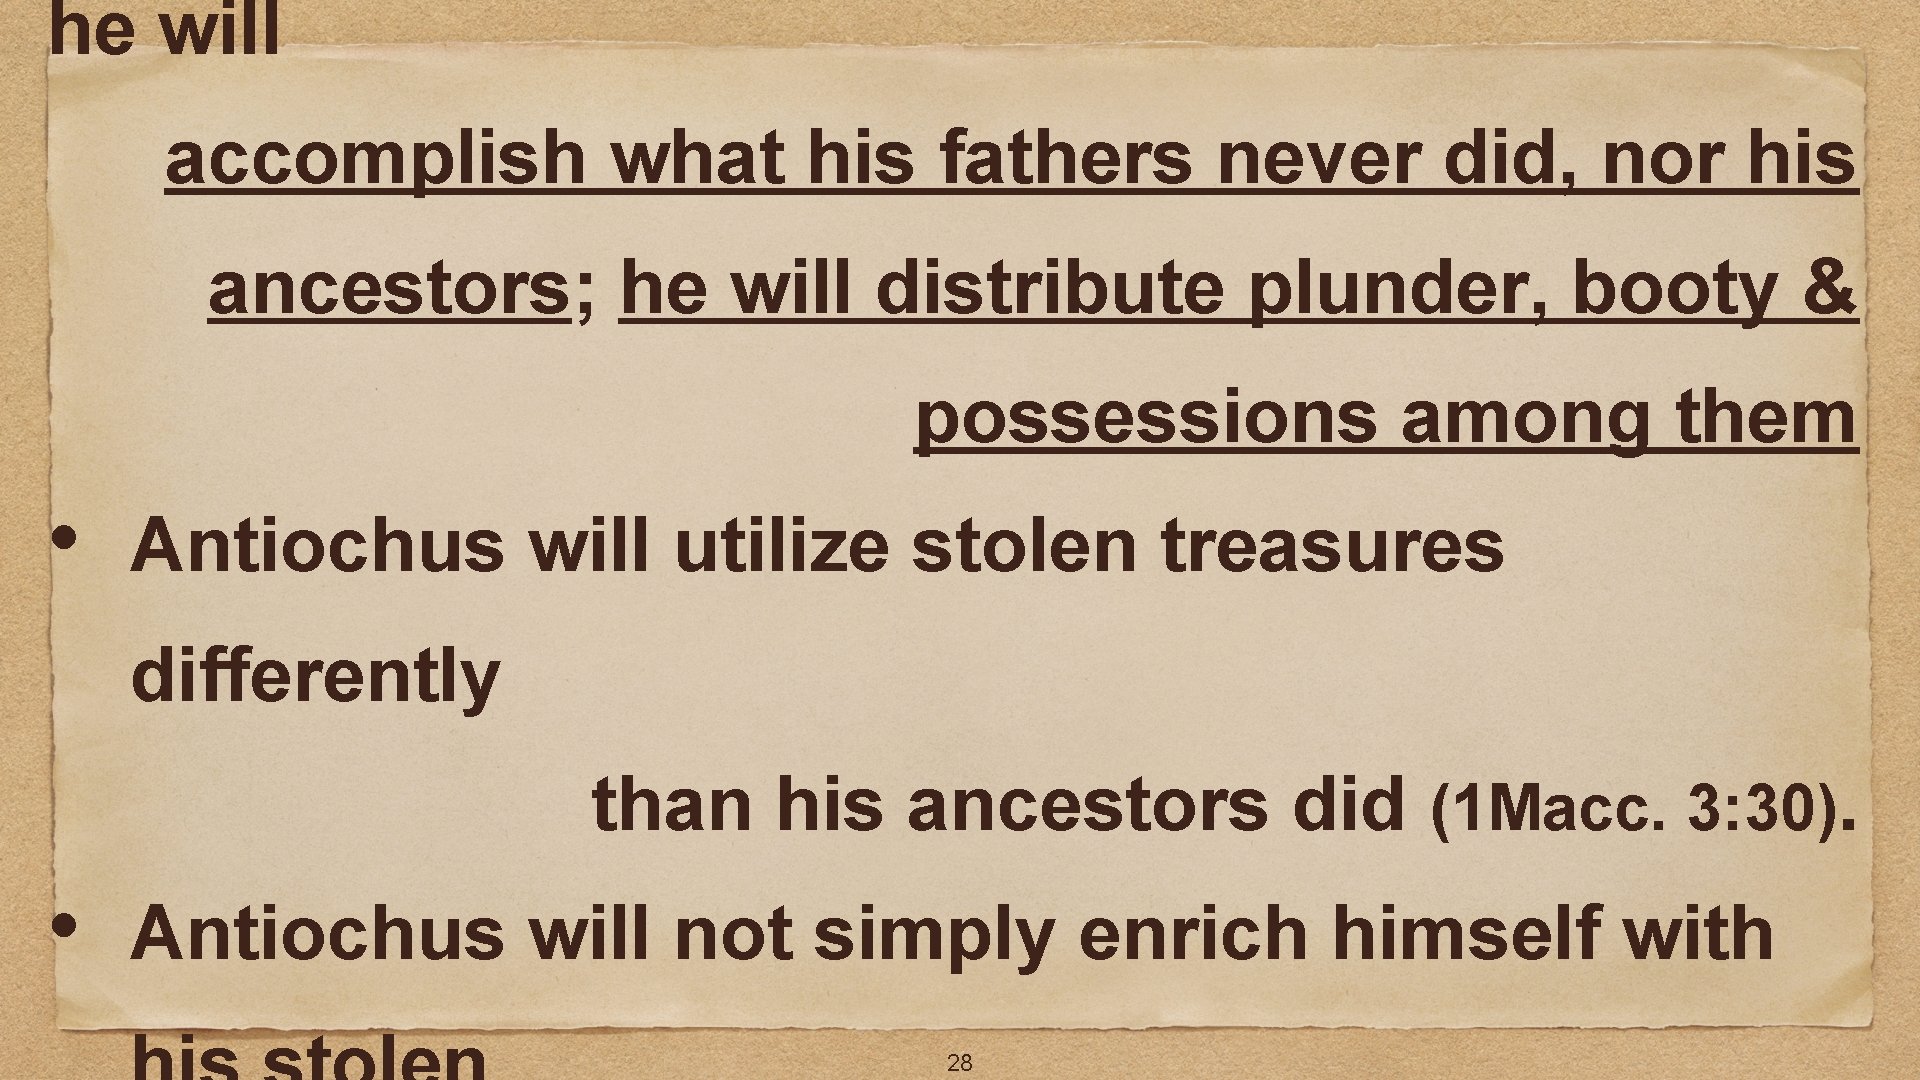 he will accomplish what his fathers never did, nor his ancestors; he will distribute